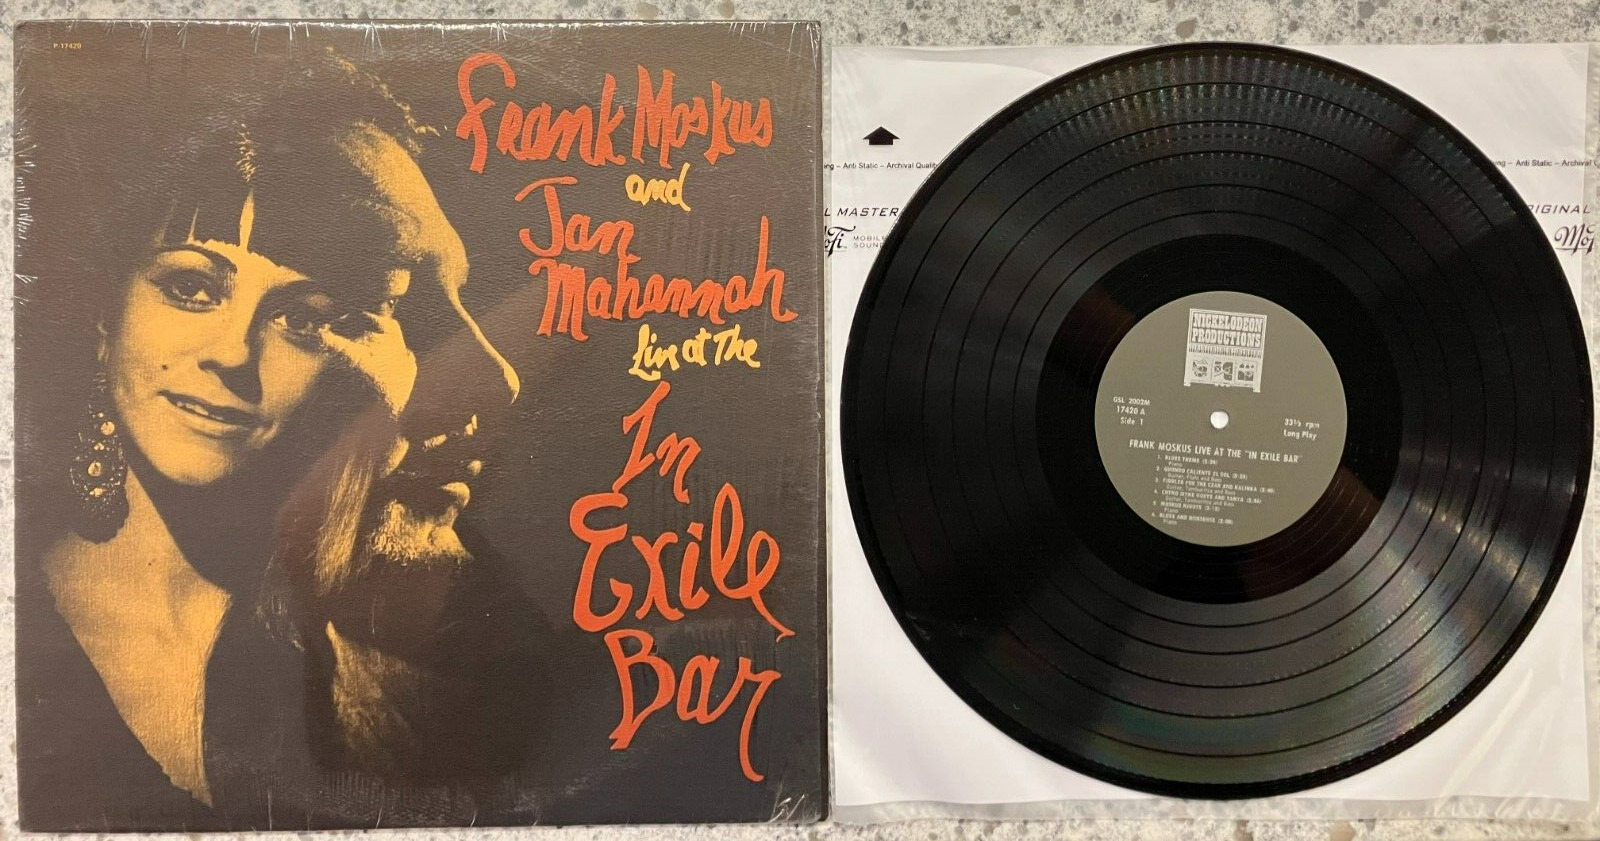 Frank Moskus And Jan Mahannah Live At The In Exile Bar ; LP SHRINK